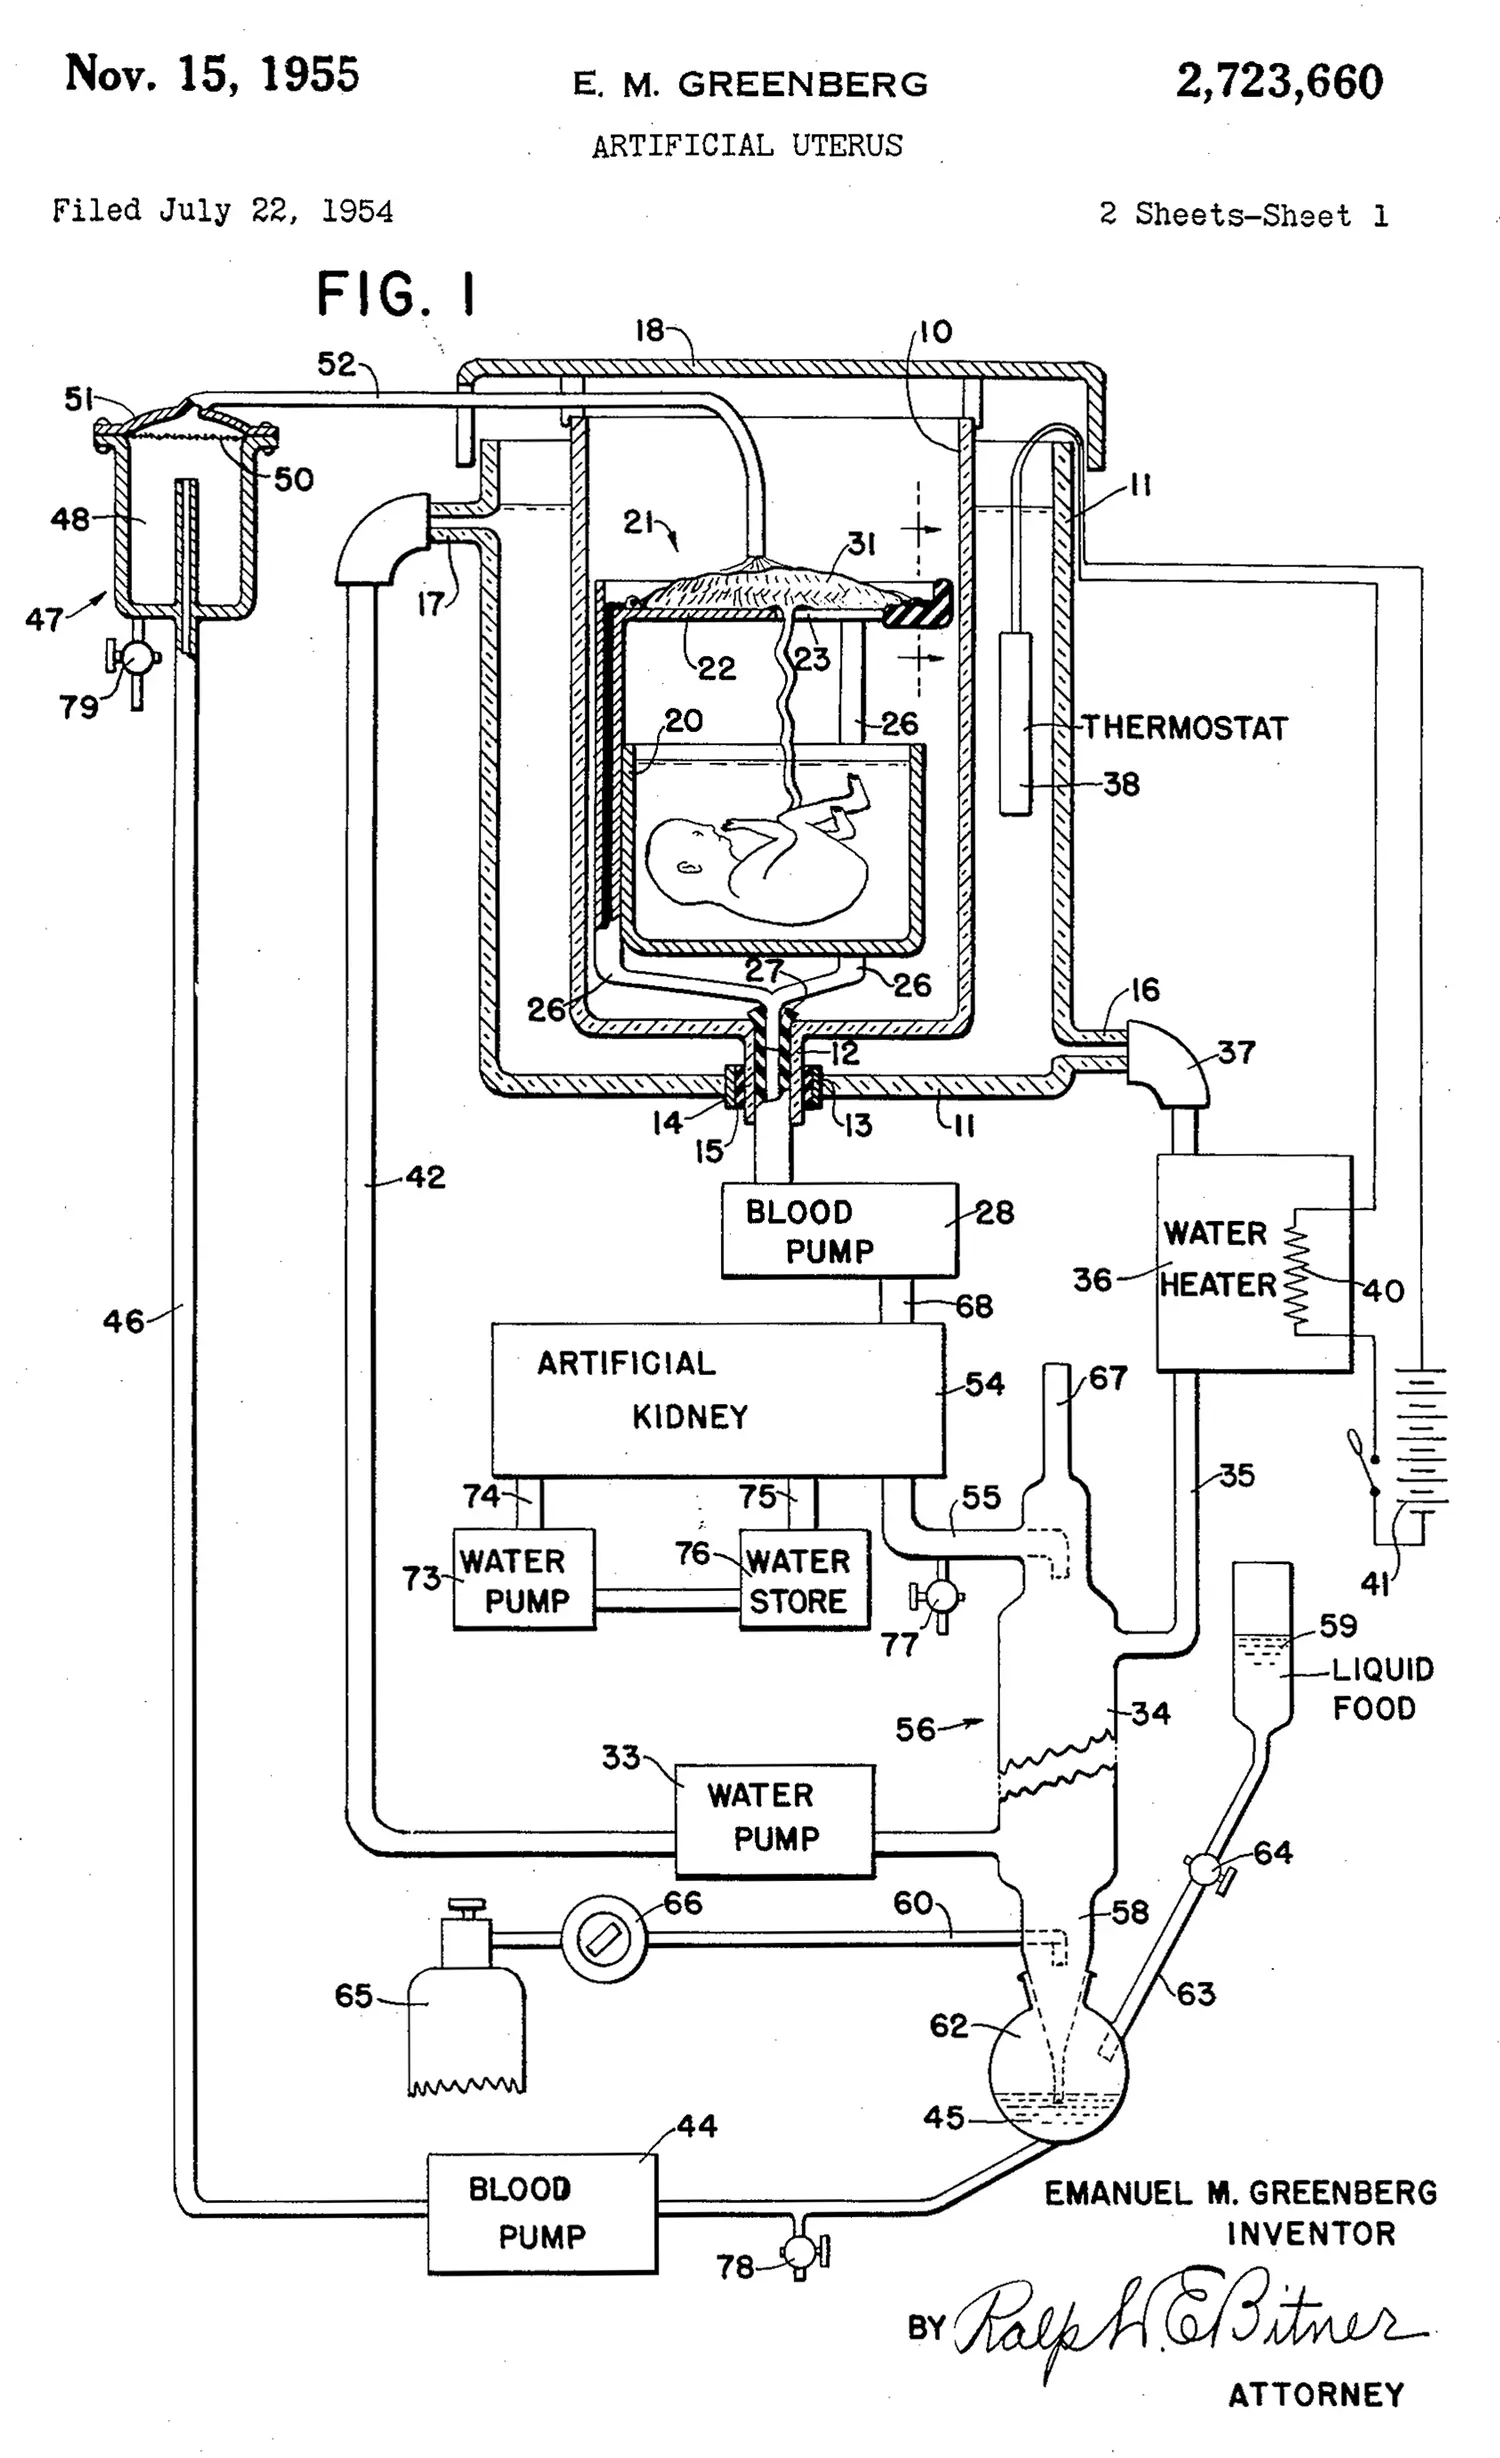 A patent diagram showing a fetus suspended in a vat connected to a series of labeled devices such as “thermostat,” “blood pump,” “water heater,” “artificial kidney,” “liquid food,” etc.